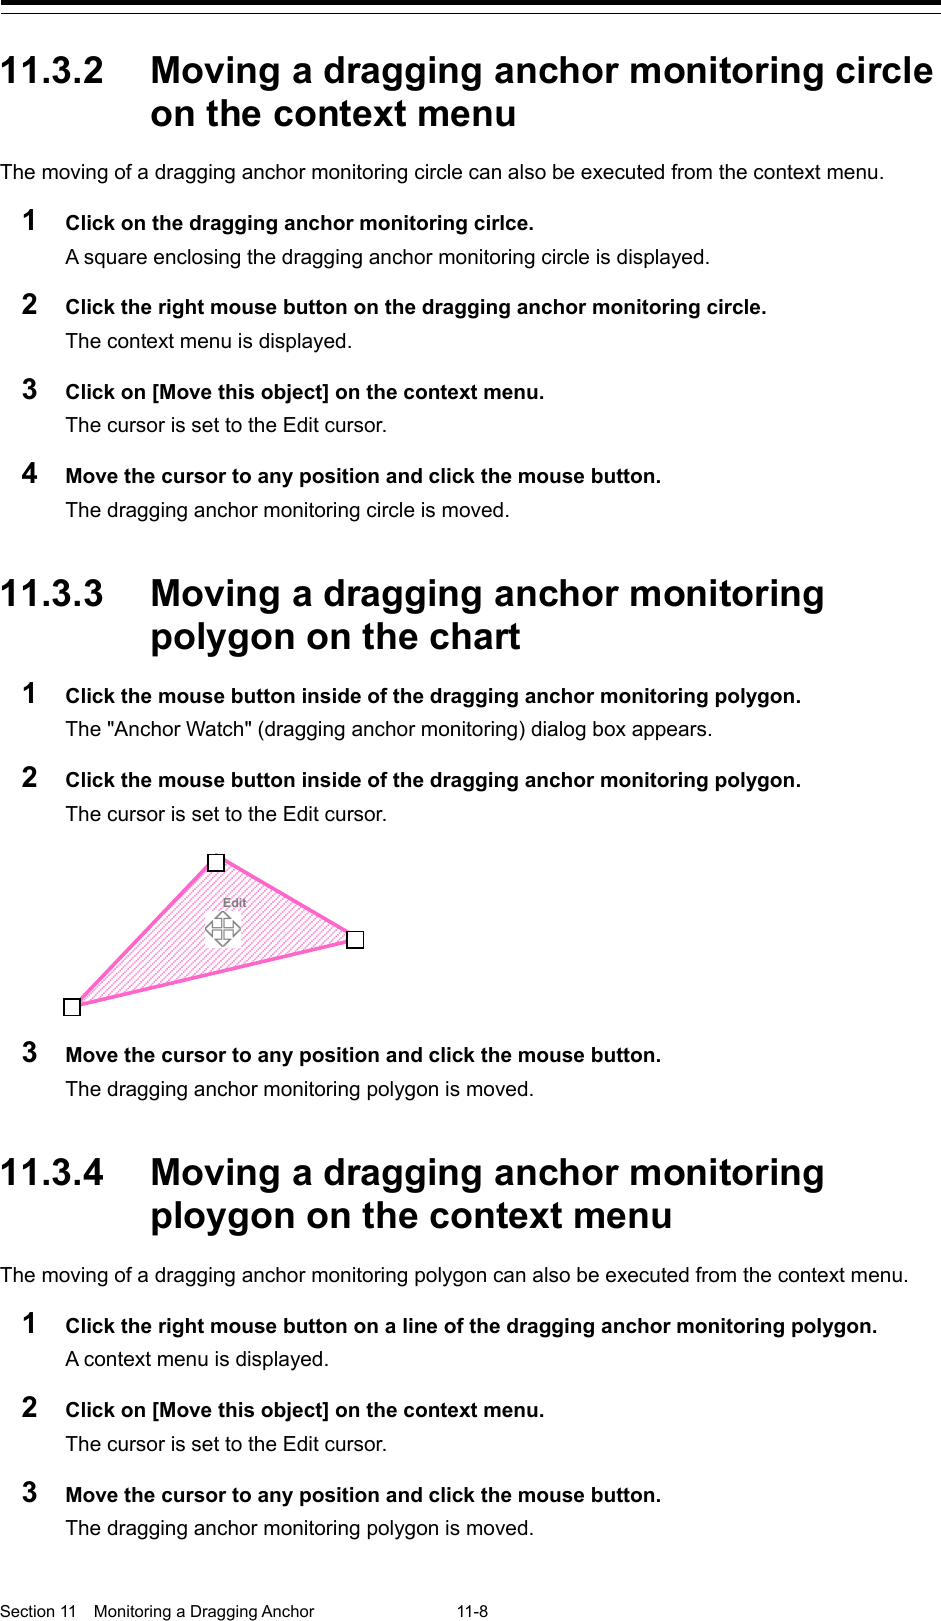  Section 11  Monitoring a Dragging Anchor  11-8  11.3.2 Moving a dragging anchor monitoring circle on the context menu The moving of a dragging anchor monitoring circle can also be executed from the context menu. 1  Click on the dragging anchor monitoring cirlce. A square enclosing the dragging anchor monitoring circle is displayed. 2  Click the right mouse button on the dragging anchor monitoring circle. The context menu is displayed. 3  Click on [Move this object] on the context menu. The cursor is set to the Edit cursor. 4  Move the cursor to any position and click the mouse button. The dragging anchor monitoring circle is moved.   11.3.3 Moving a dragging anchor monitoring polygon on the chart 1  Click the mouse button inside of the dragging anchor monitoring polygon. The &quot;Anchor Watch&quot; (dragging anchor monitoring) dialog box appears. 2  Click the mouse button inside of the dragging anchor monitoring polygon. The cursor is set to the Edit cursor.  3  Move the cursor to any position and click the mouse button. The dragging anchor monitoring polygon is moved.   11.3.4 Moving a dragging anchor monitoring ploygon on the context menu The moving of a dragging anchor monitoring polygon can also be executed from the context menu. 1  Click the right mouse button on a line of the dragging anchor monitoring polygon.   A context menu is displayed. 2  Click on [Move this object] on the context menu. The cursor is set to the Edit cursor. 3  Move the cursor to any position and click the mouse button. The dragging anchor monitoring polygon is moved.        Edit 